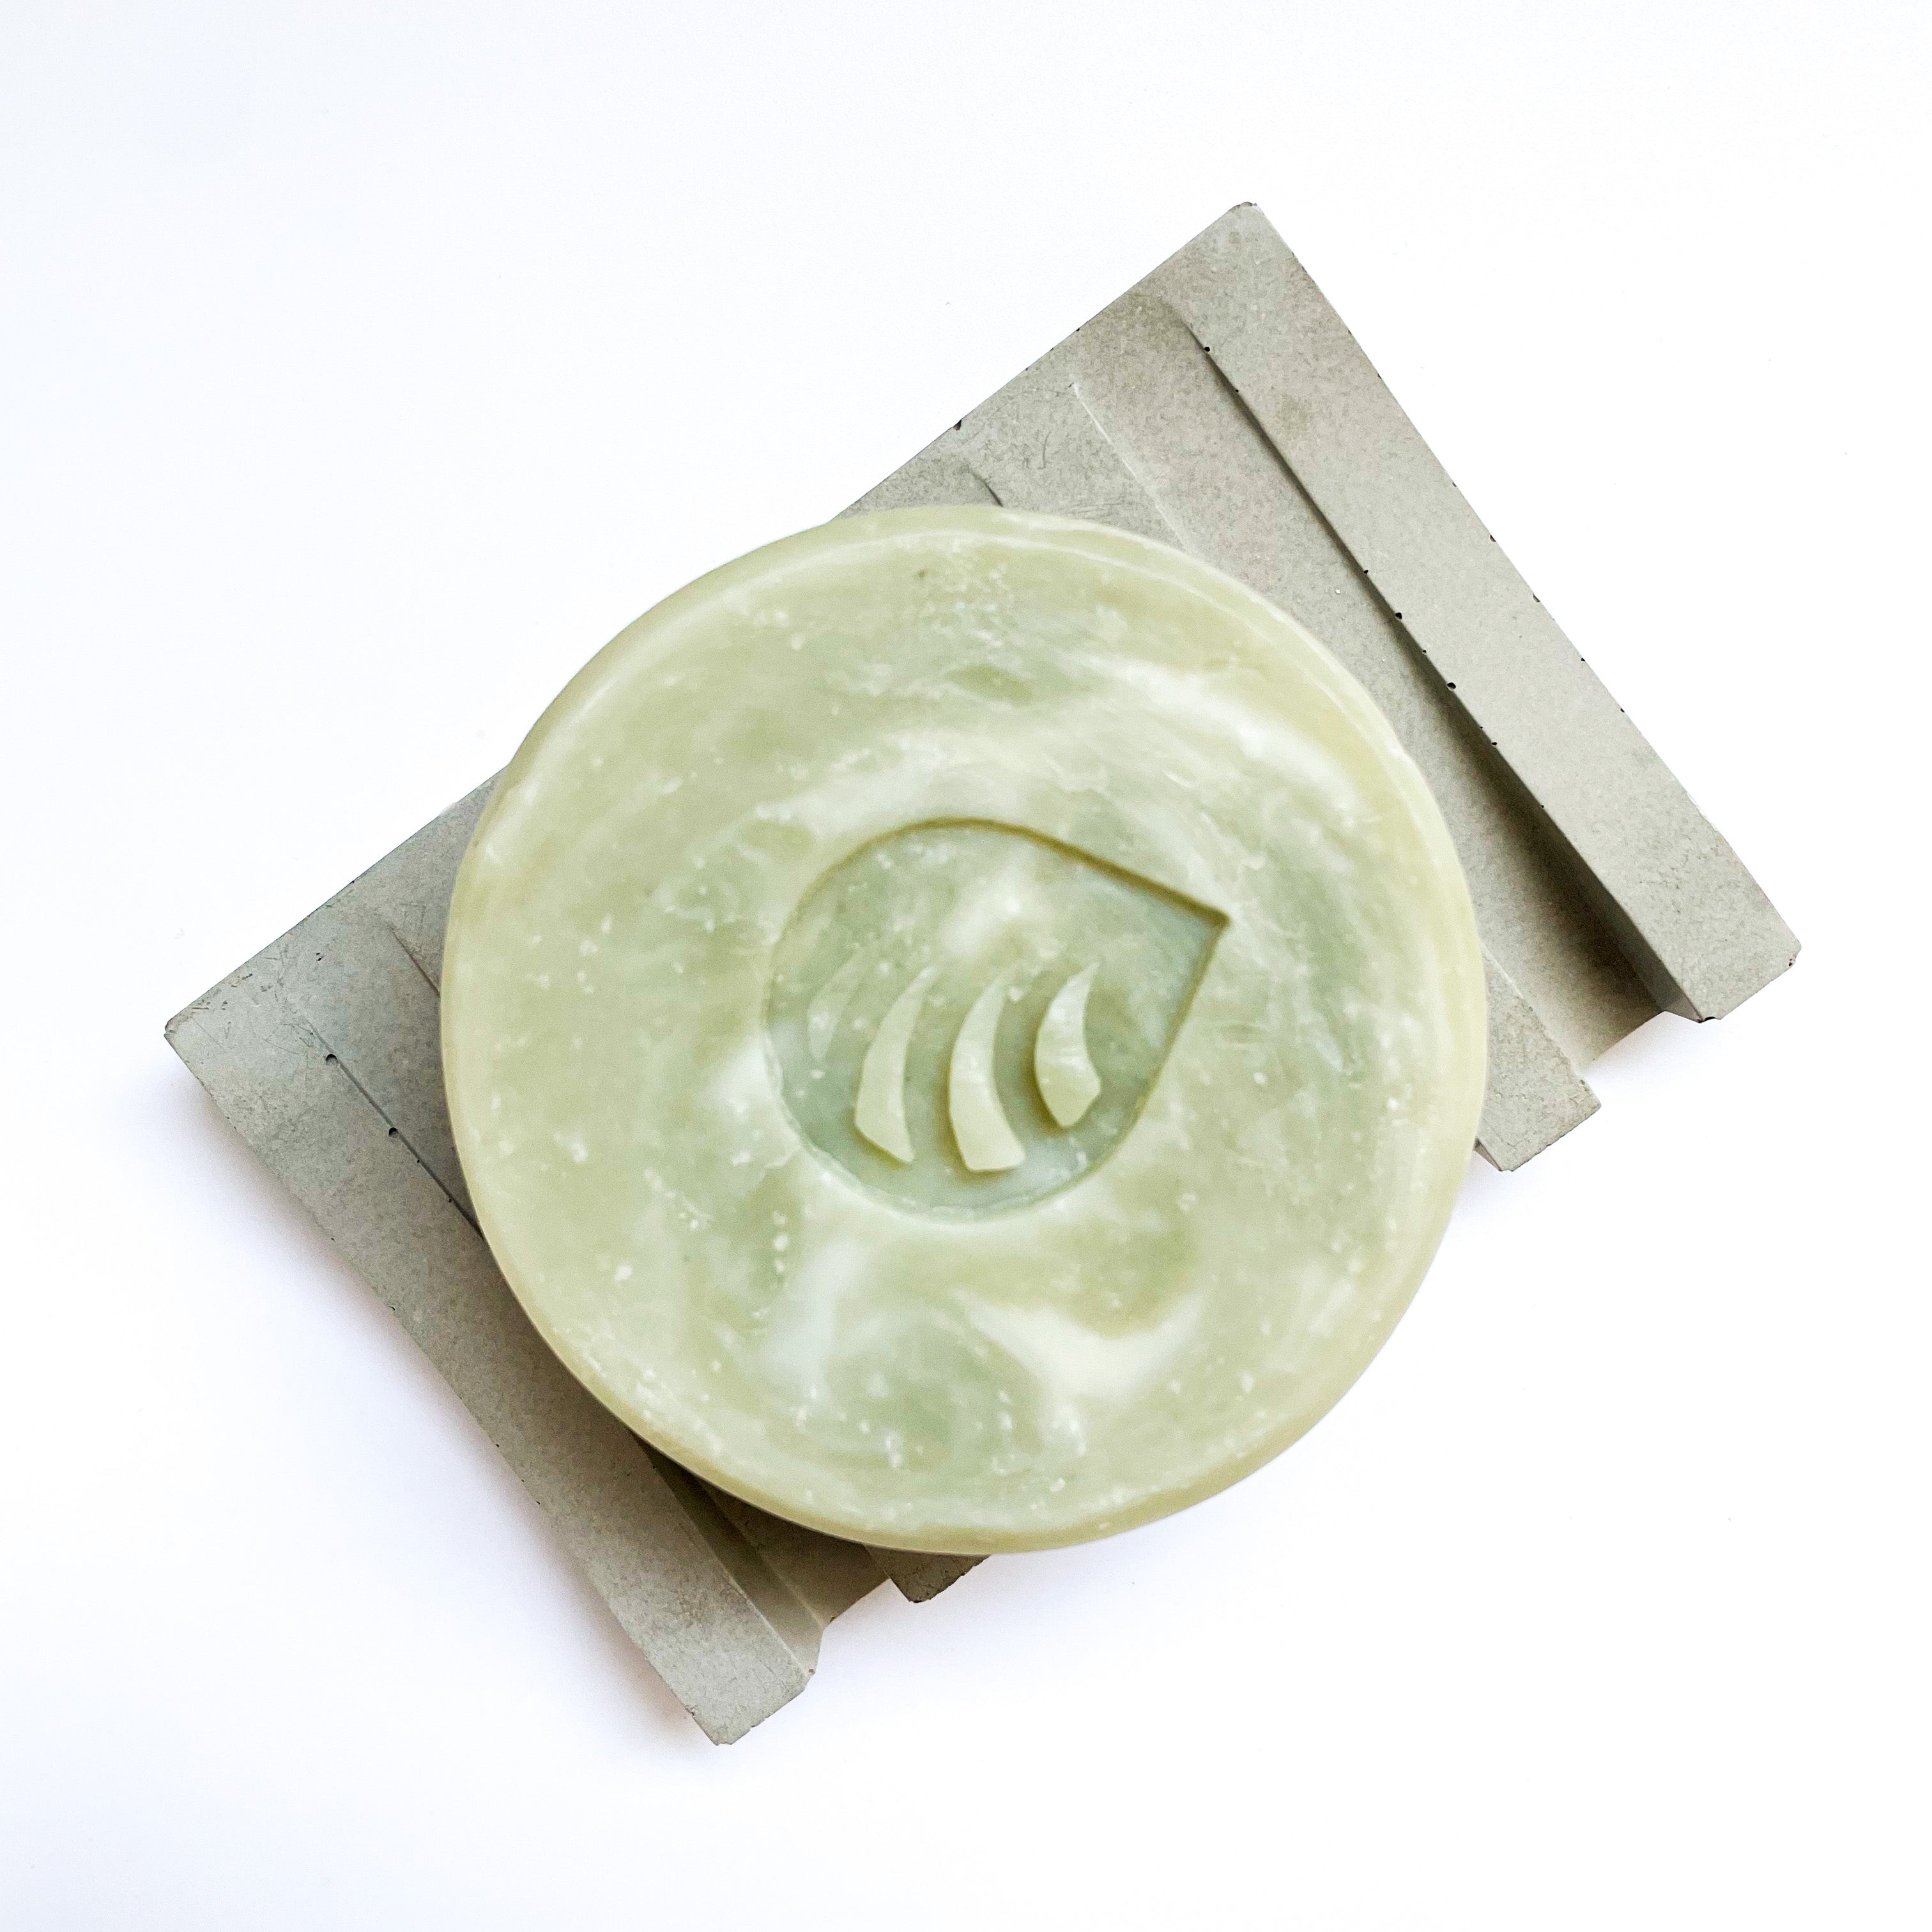 Recharge handmade soap made with peppermint and rosemary and green clay. Made in Calgary.